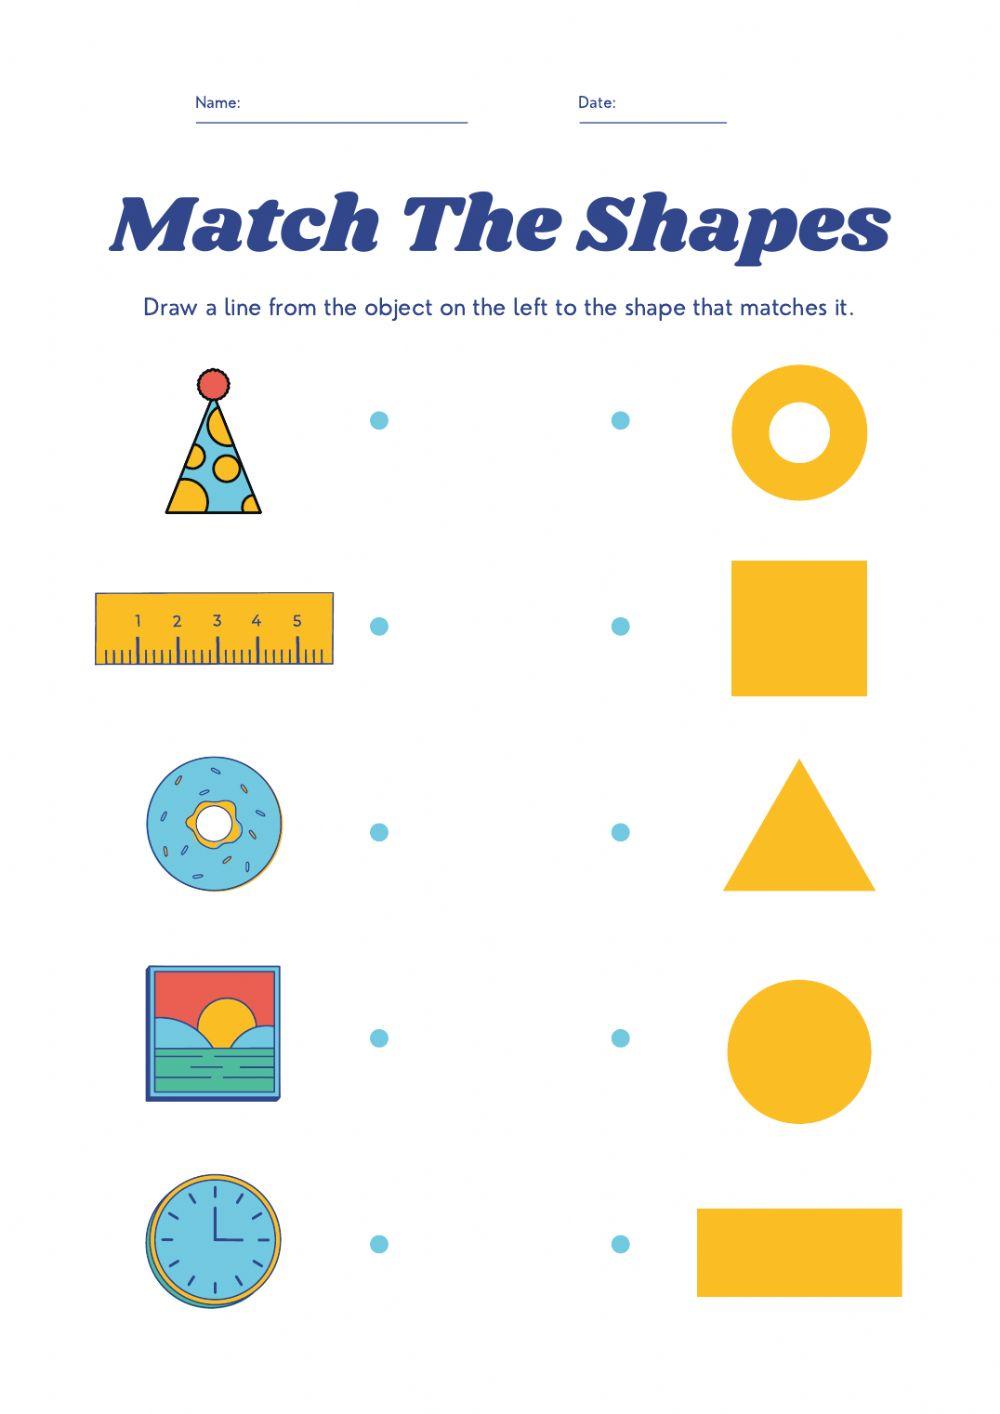 Match the shapes